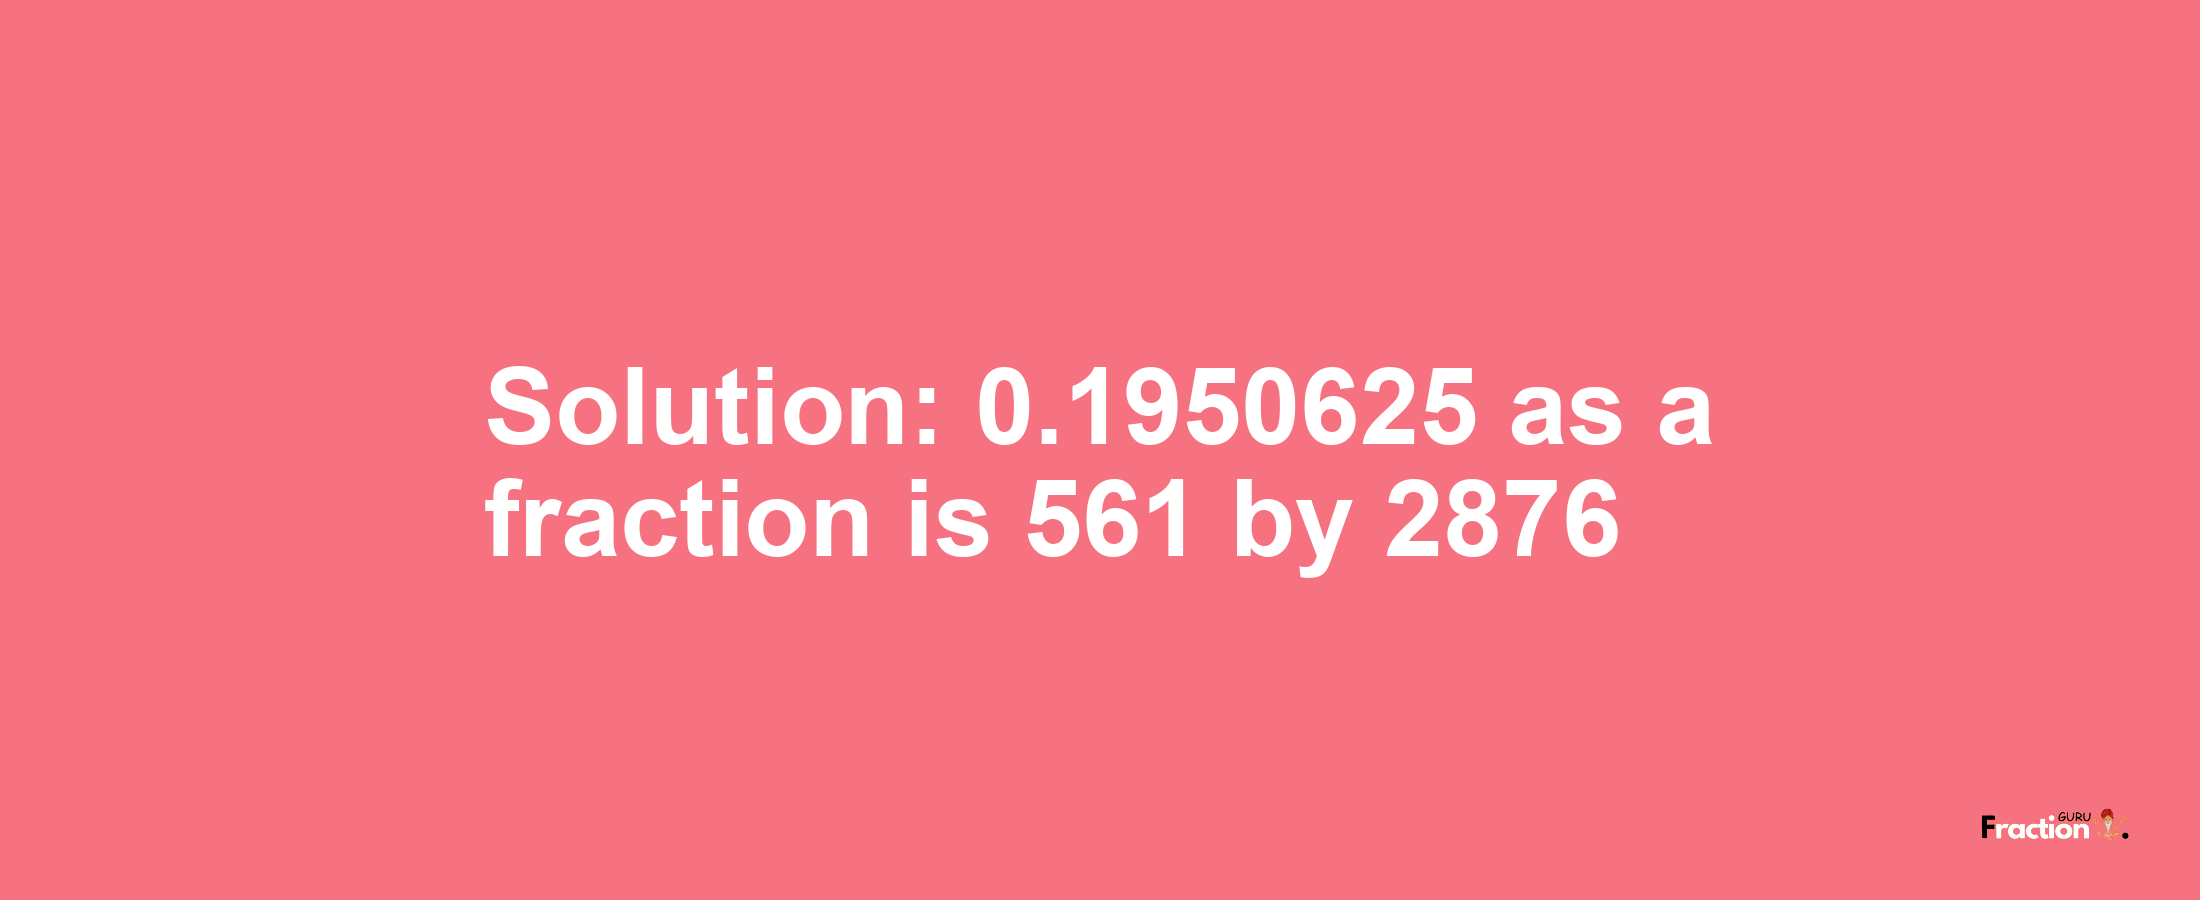 Solution:0.1950625 as a fraction is 561/2876